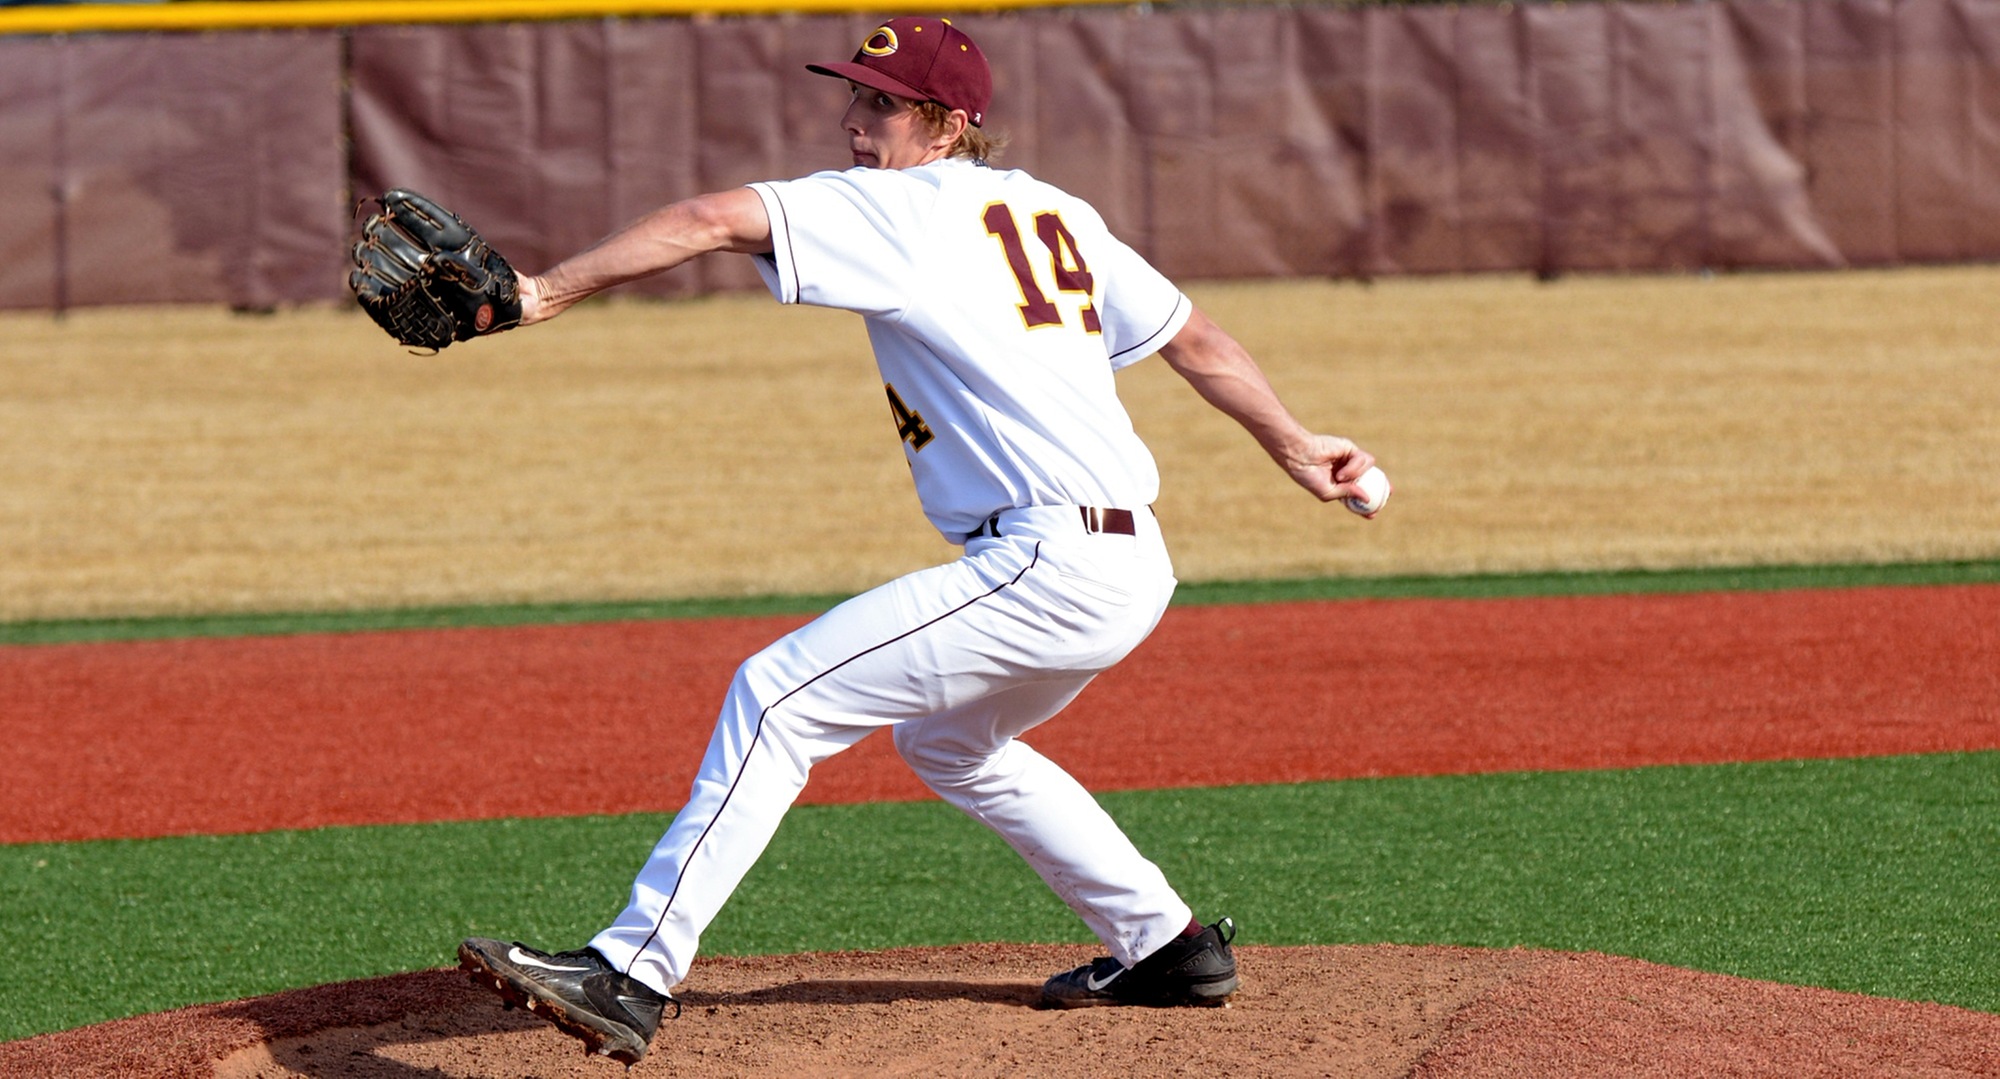 Freshman Austin Ver Steeg allowed only two hits and pitched a complete-game shutout to help the Cobbers sweep Gustavus.